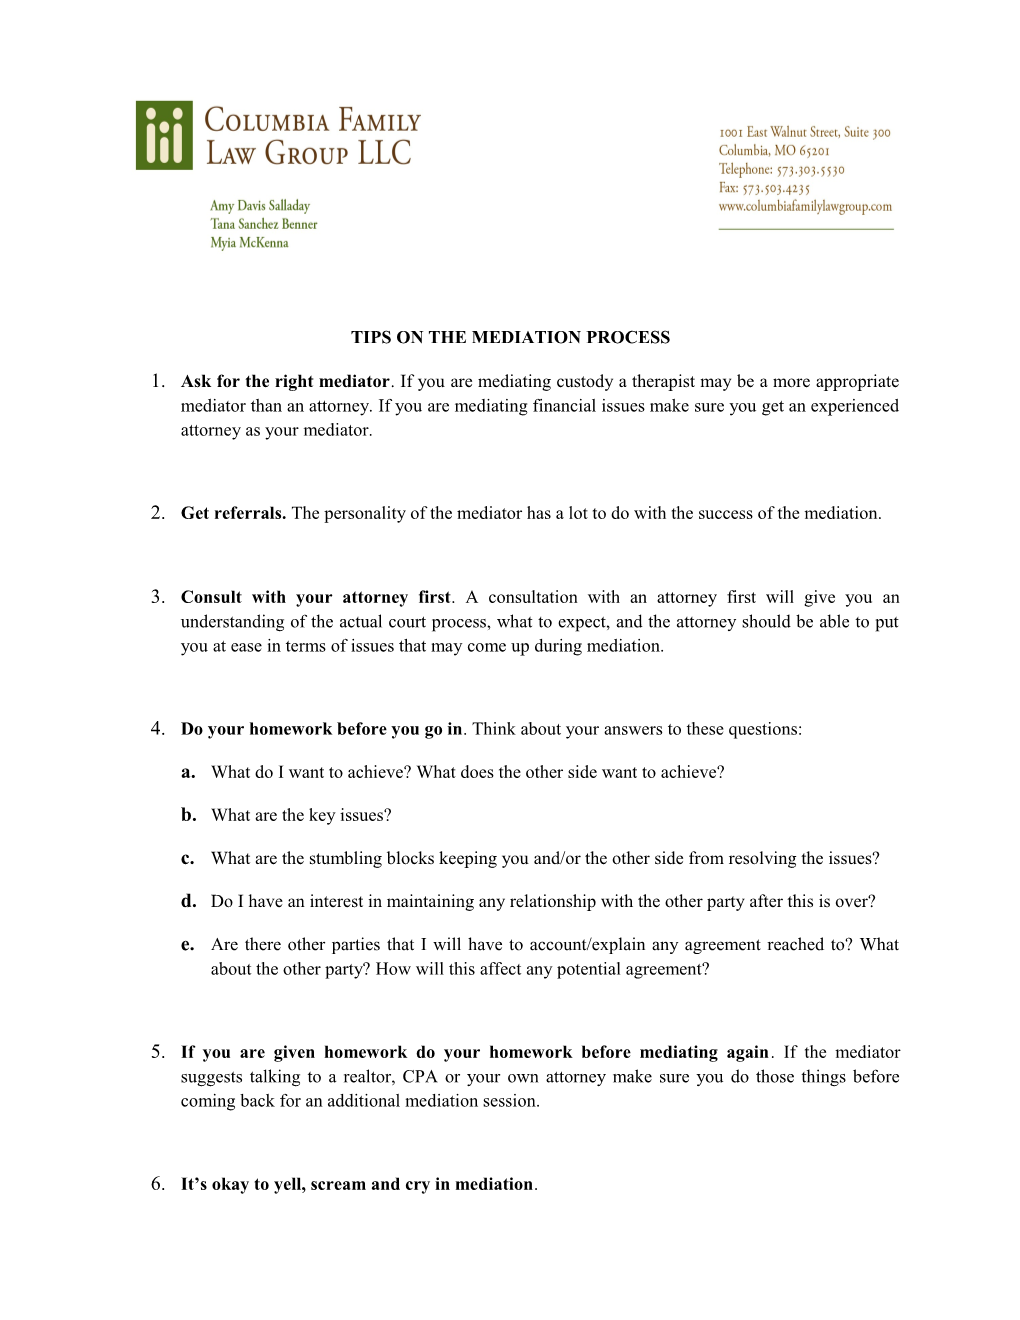 Tips on the Mediation Process